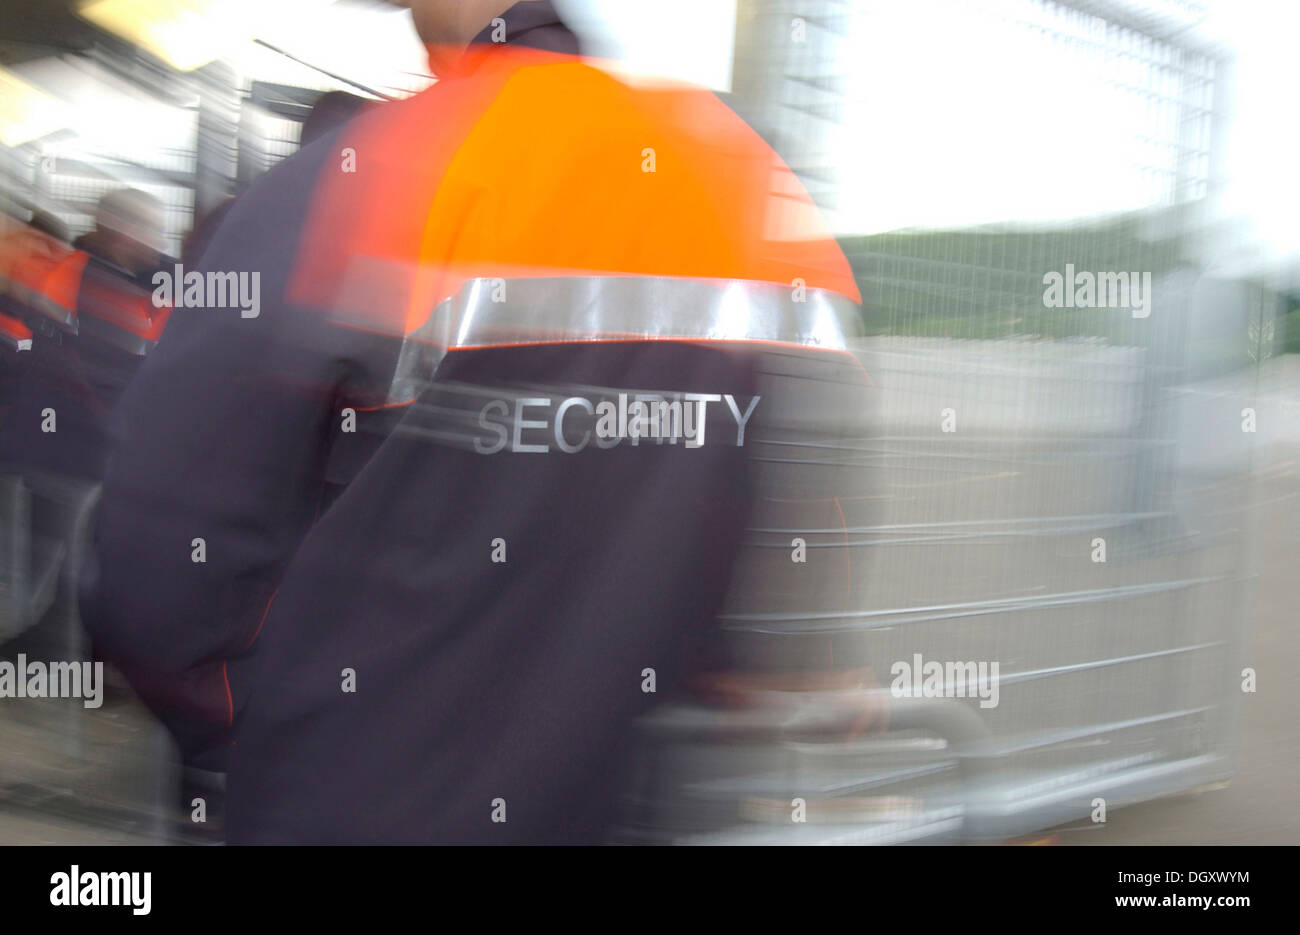 Man wearing a security jacket, blurred from behind Stock Photo